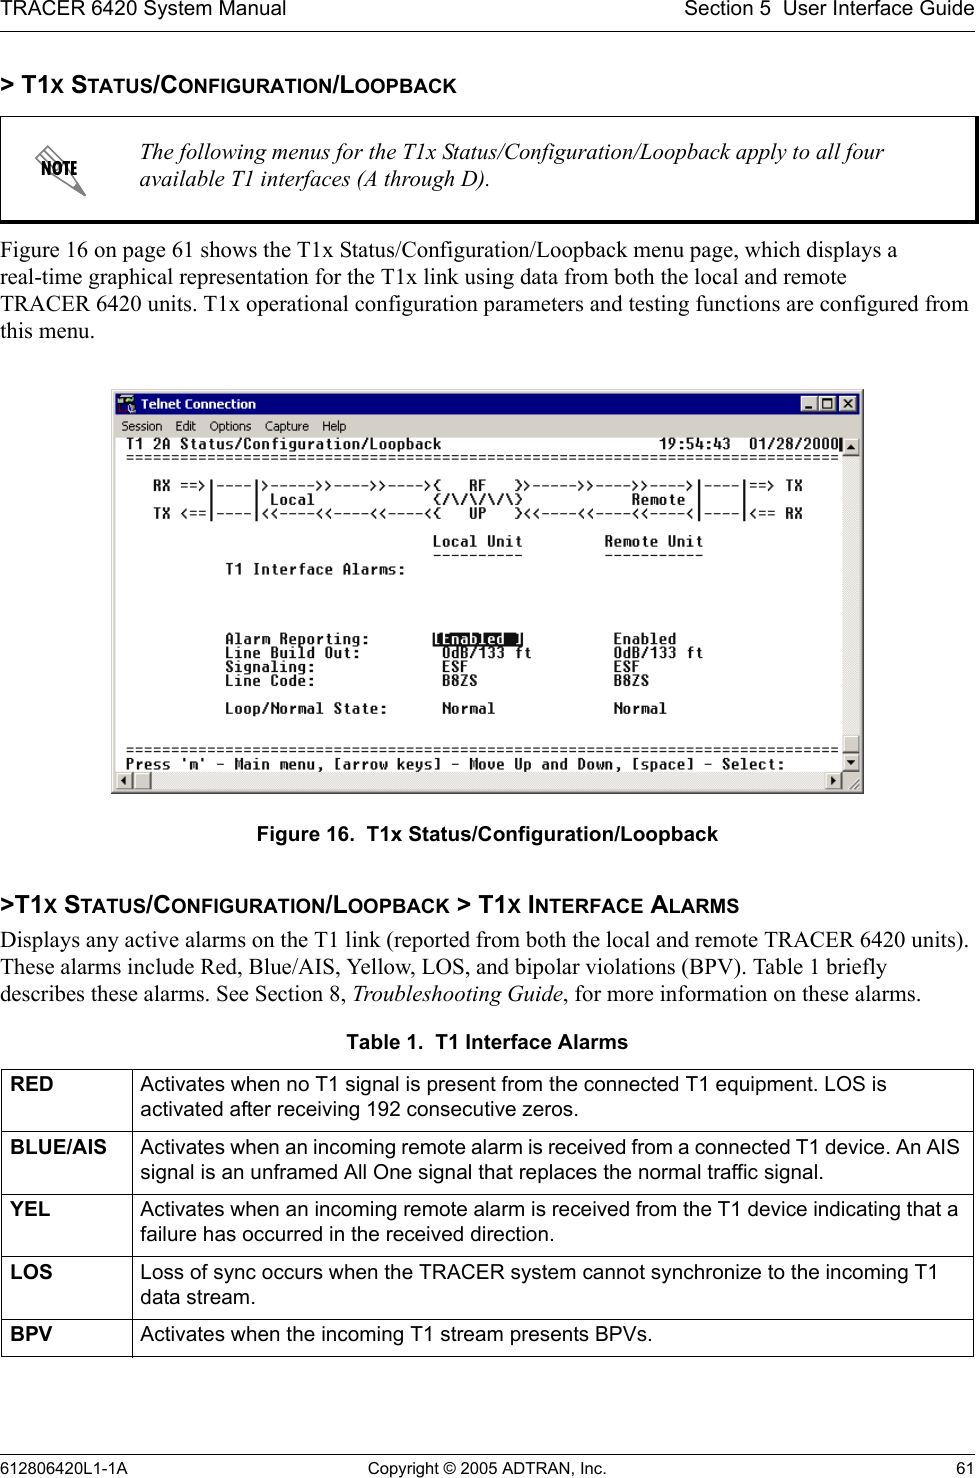 TRACER 6420 System Manual Section 5  User Interface Guide612806420L1-1A Copyright © 2005 ADTRAN, Inc. 61&gt; T1X STATUS/CONFIGURATION/LOOPBACKFigure 16 on page 61 shows the T1x Status/Configuration/Loopback menu page, which displays a real-time graphical representation for the T1x link using data from both the local and remote TRACER 6420 units. T1x operational configuration parameters and testing functions are configured from this menu.Figure 16.  T1x Status/Configuration/Loopback&gt;T1X STATUS/CONFIGURATION/LOOPBACK &gt; T1X INTERFACE ALARMSDisplays any active alarms on the T1 link (reported from both the local and remote TRACER 6420 units). These alarms include Red, Blue/AIS, Yellow, LOS, and bipolar violations (BPV). Table 1 briefly describes these alarms. See Section 8, Troubleshooting Guide, for more information on these alarms.The following menus for the T1x Status/Configuration/Loopback apply to all four available T1 interfaces (A through D).Table 1.  T1 Interface Alarms RED Activates when no T1 signal is present from the connected T1 equipment. LOS is activated after receiving 192 consecutive zeros.BLUE/AIS Activates when an incoming remote alarm is received from a connected T1 device. An AIS signal is an unframed All One signal that replaces the normal traffic signal.YEL Activates when an incoming remote alarm is received from the T1 device indicating that a failure has occurred in the received direction.LOS Loss of sync occurs when the TRACER system cannot synchronize to the incoming T1 data stream.BPV Activates when the incoming T1 stream presents BPVs.